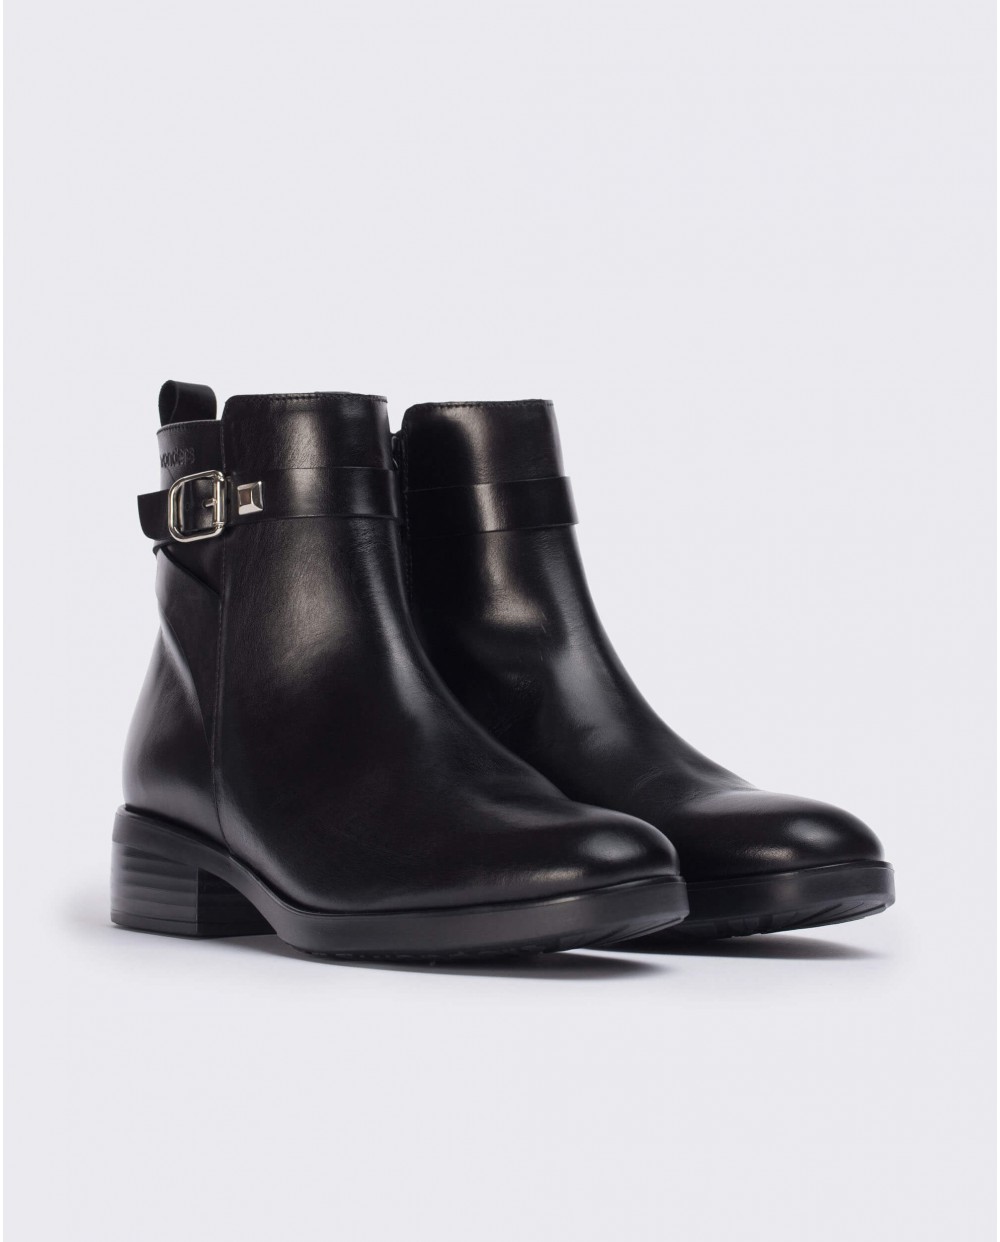 Wonders-Ankle Boots-Black Dai Ankle Boot